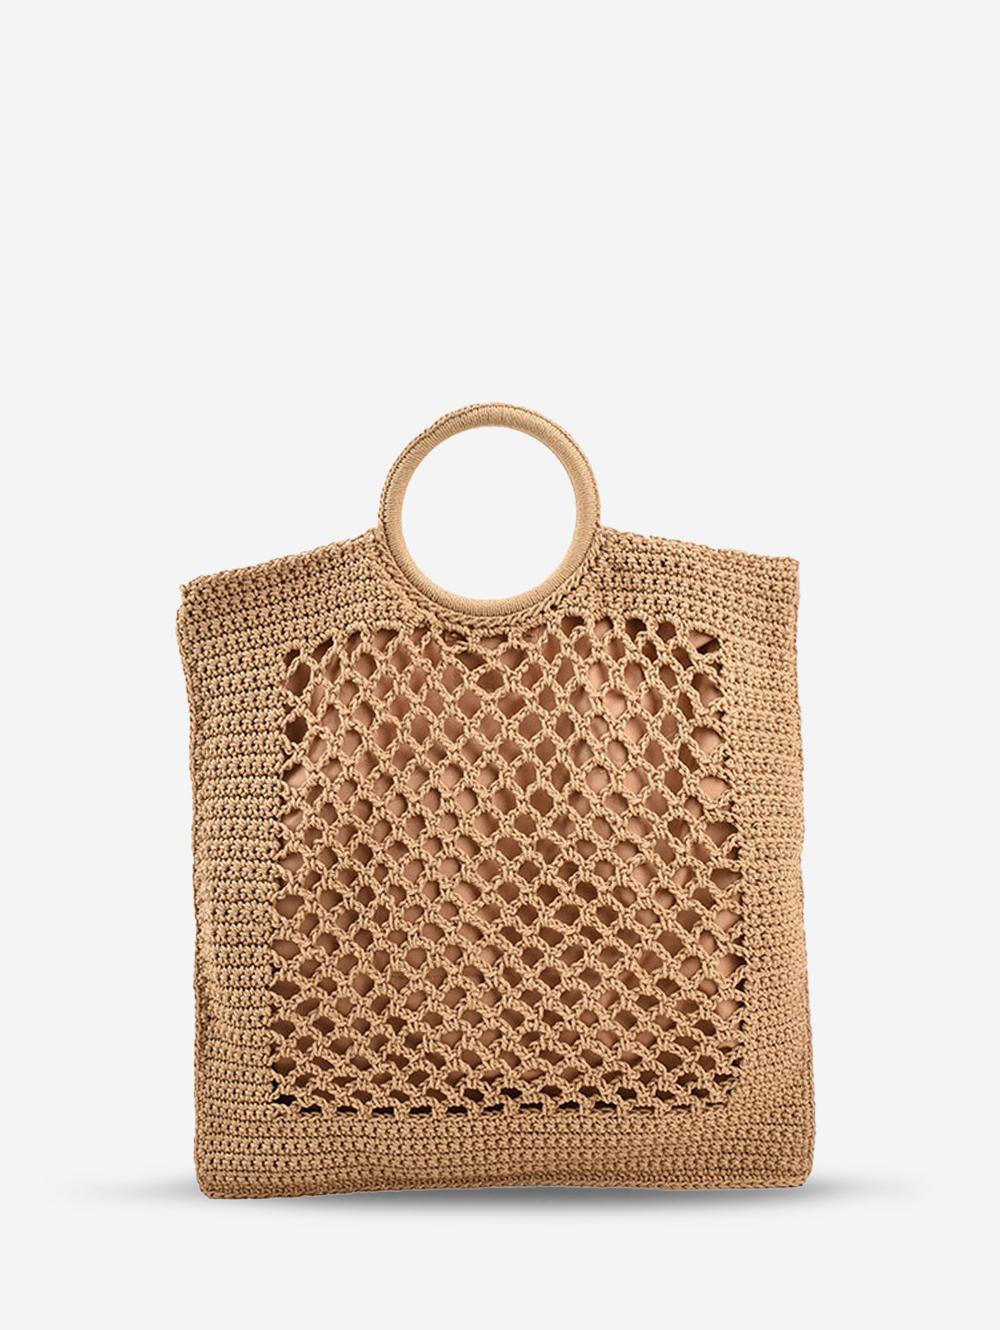 ZAFUL Women's Daily Summer Vacation Beach Crochet Knit Openwork Top Handle Large Capacity Tote Bag